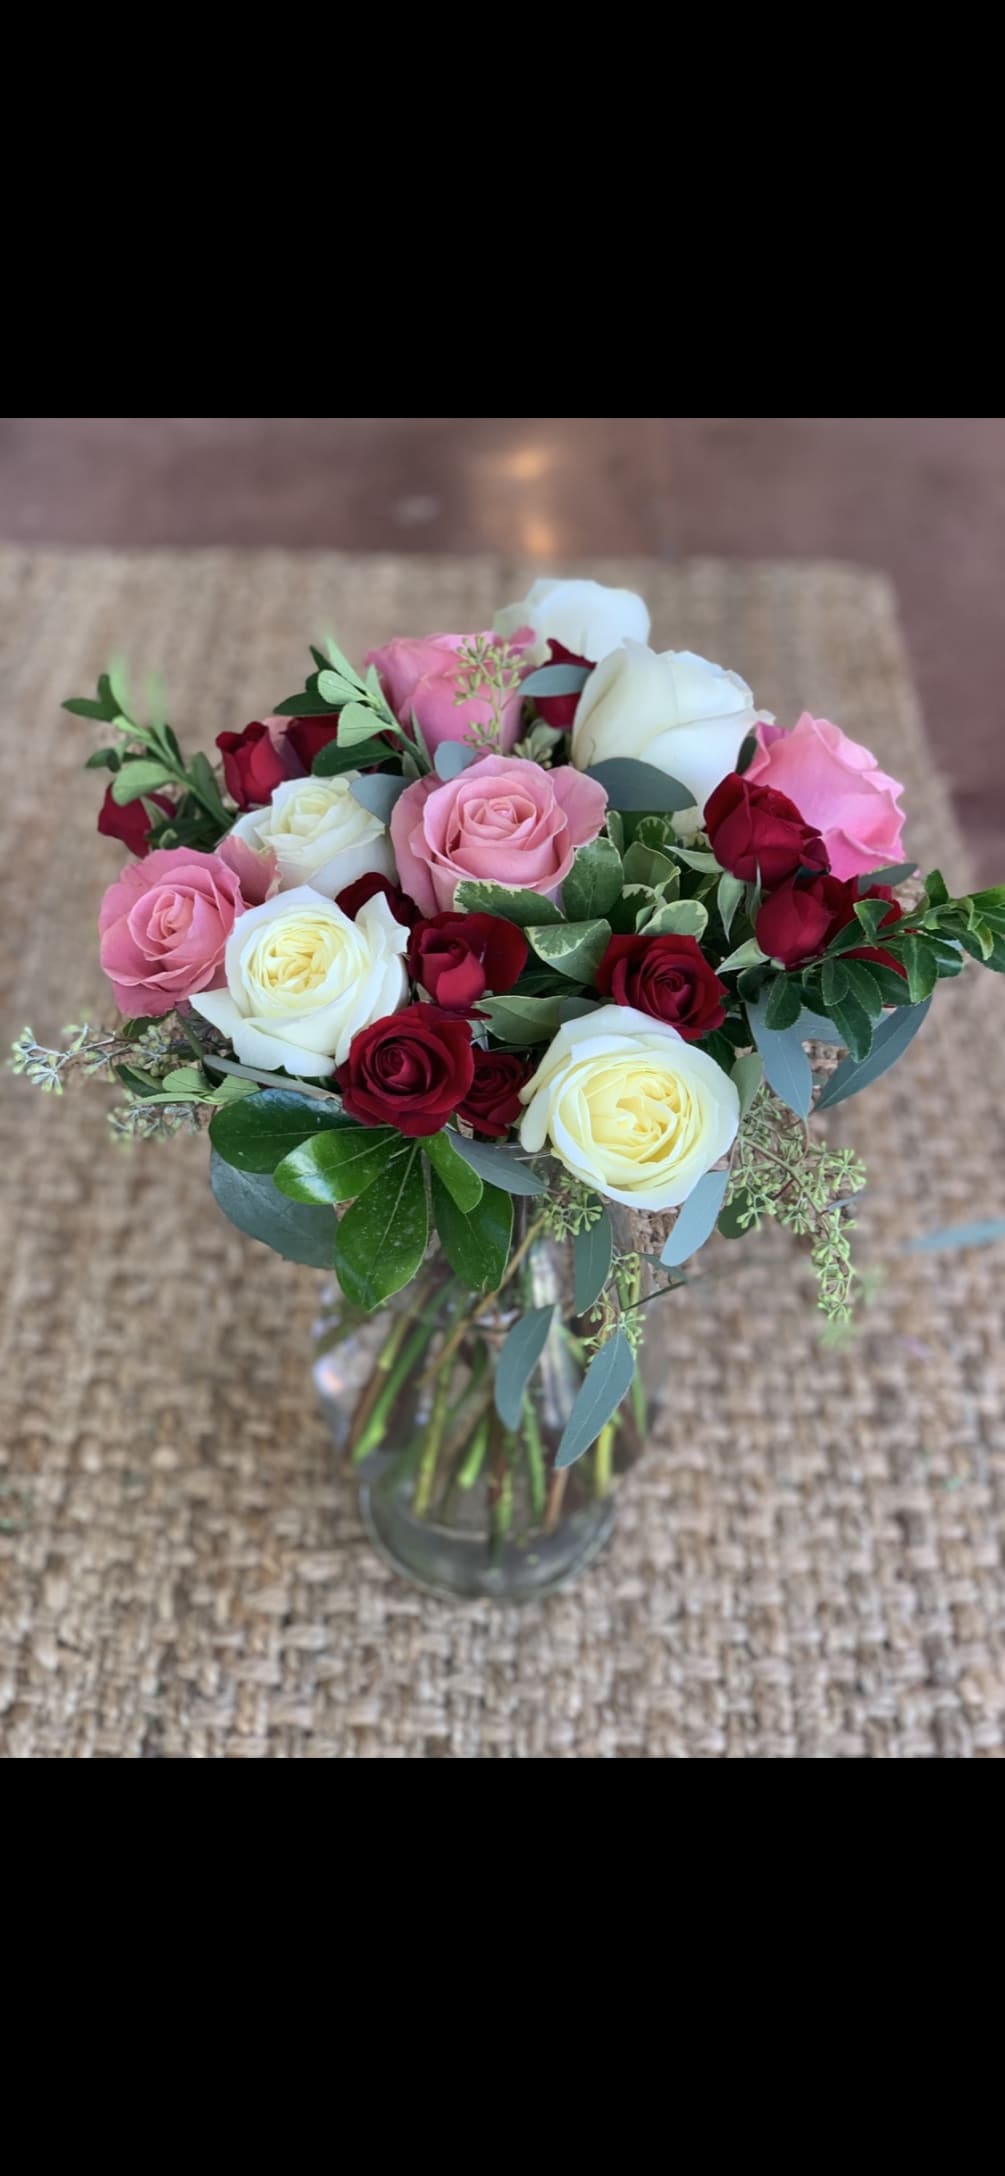 Dozen roses in various colors with greens